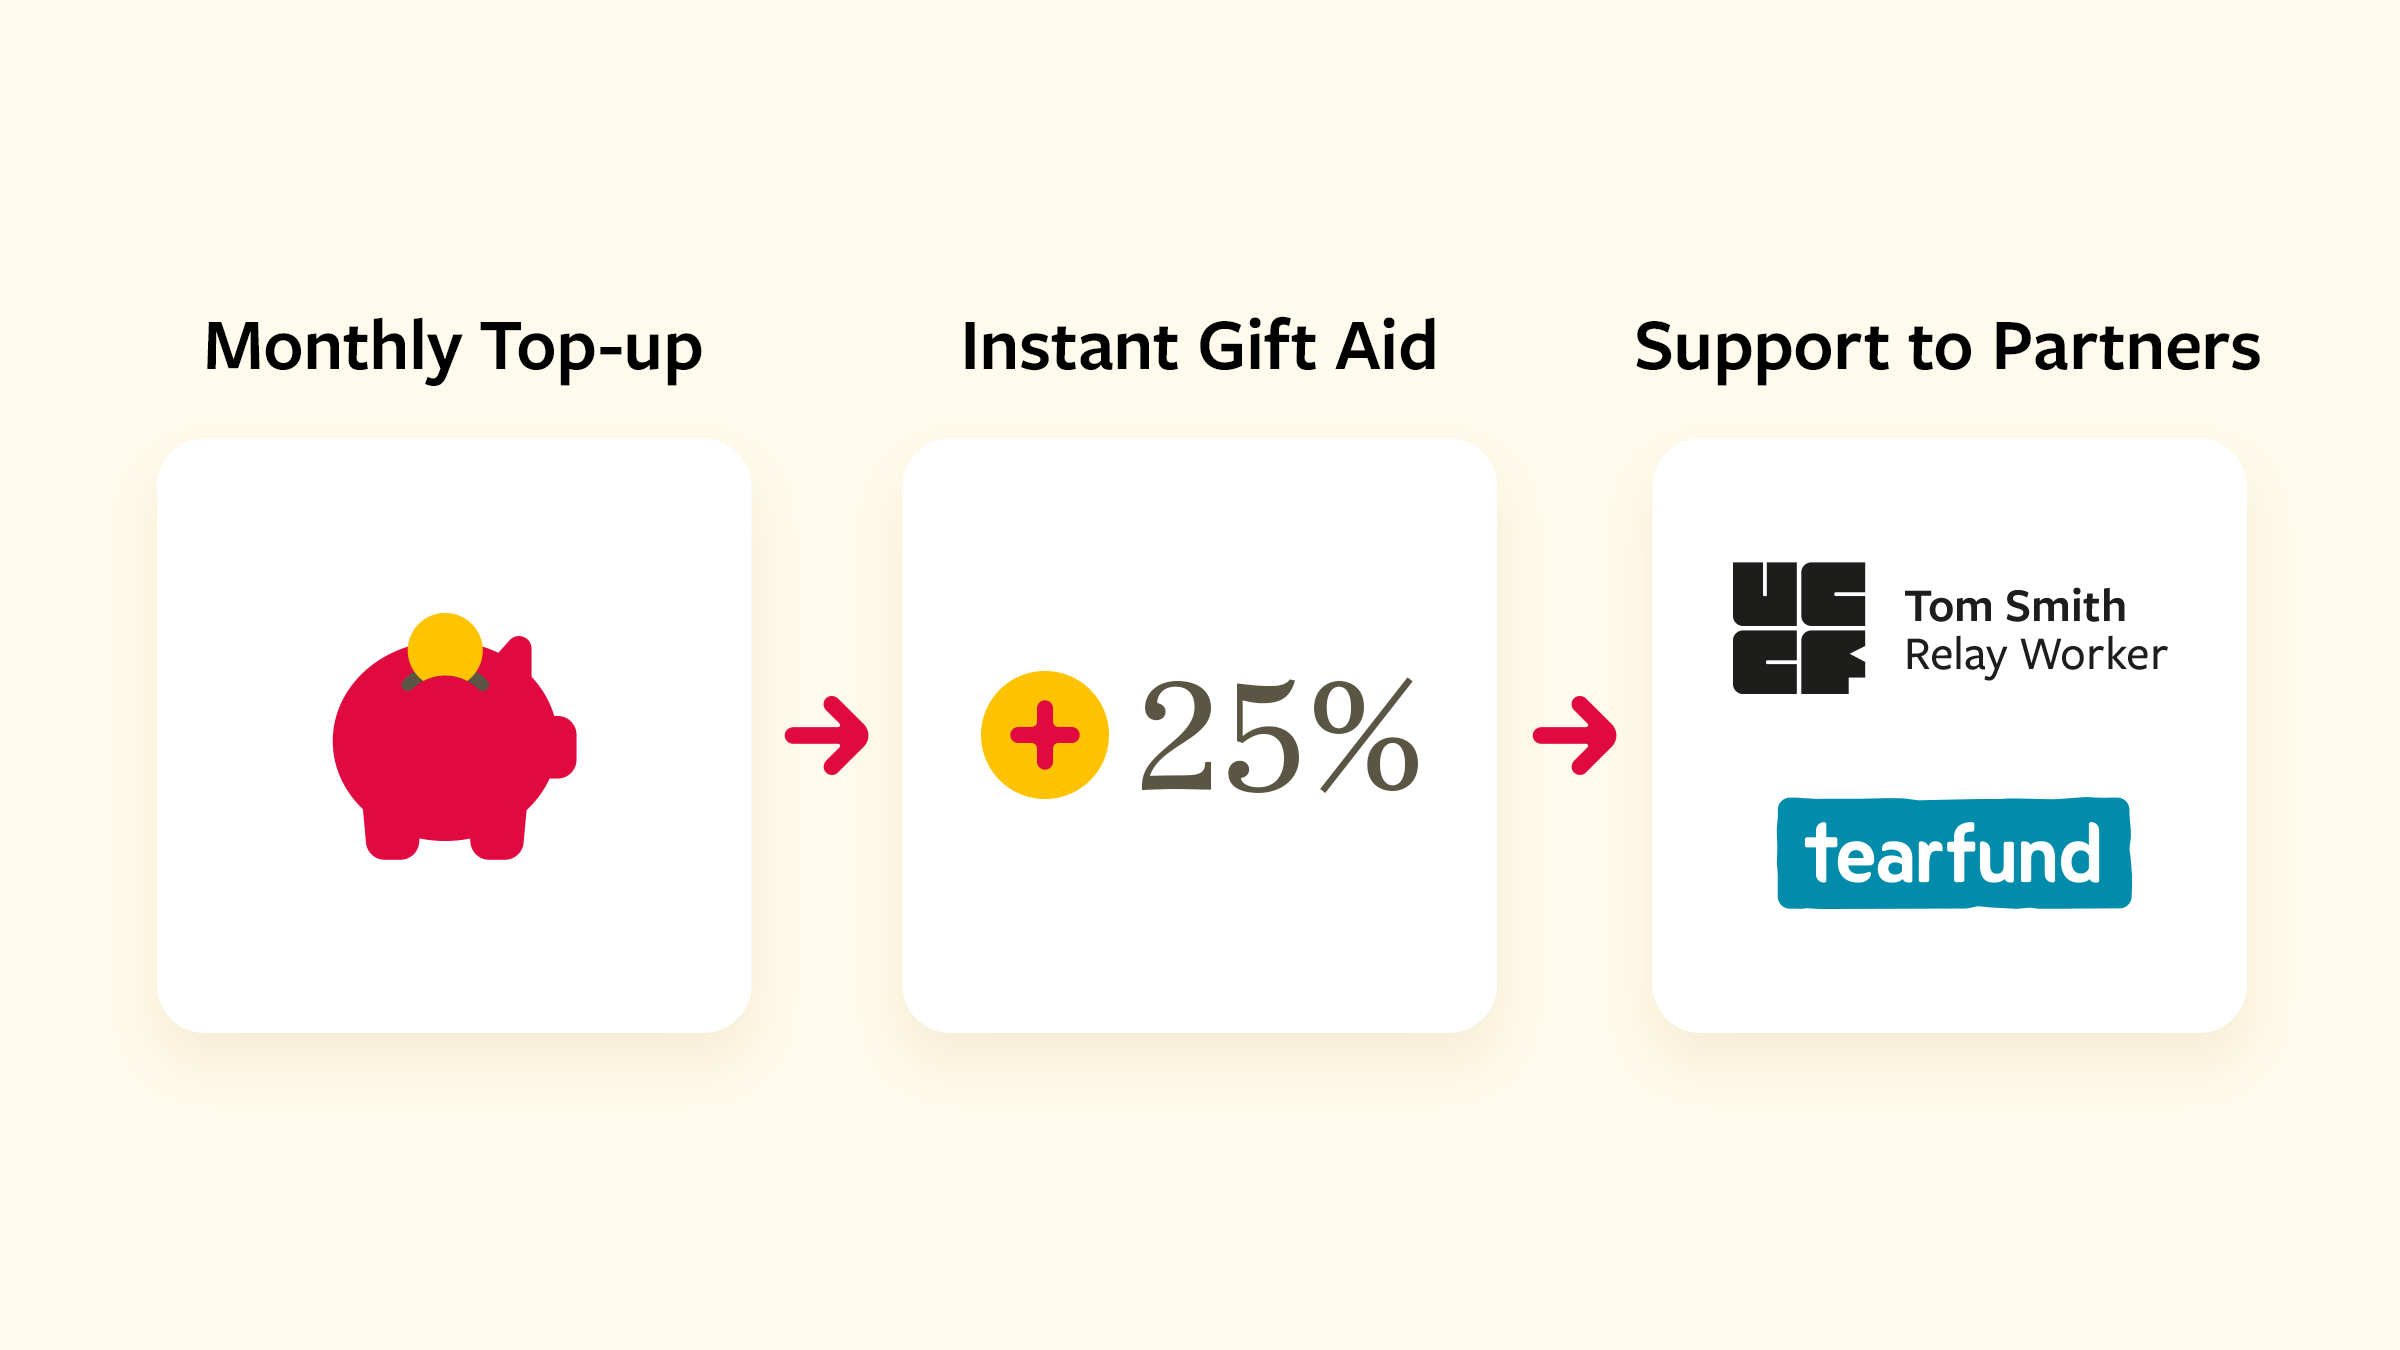 Diagram showing how Gift Aid boosts the value of a monthly top-up